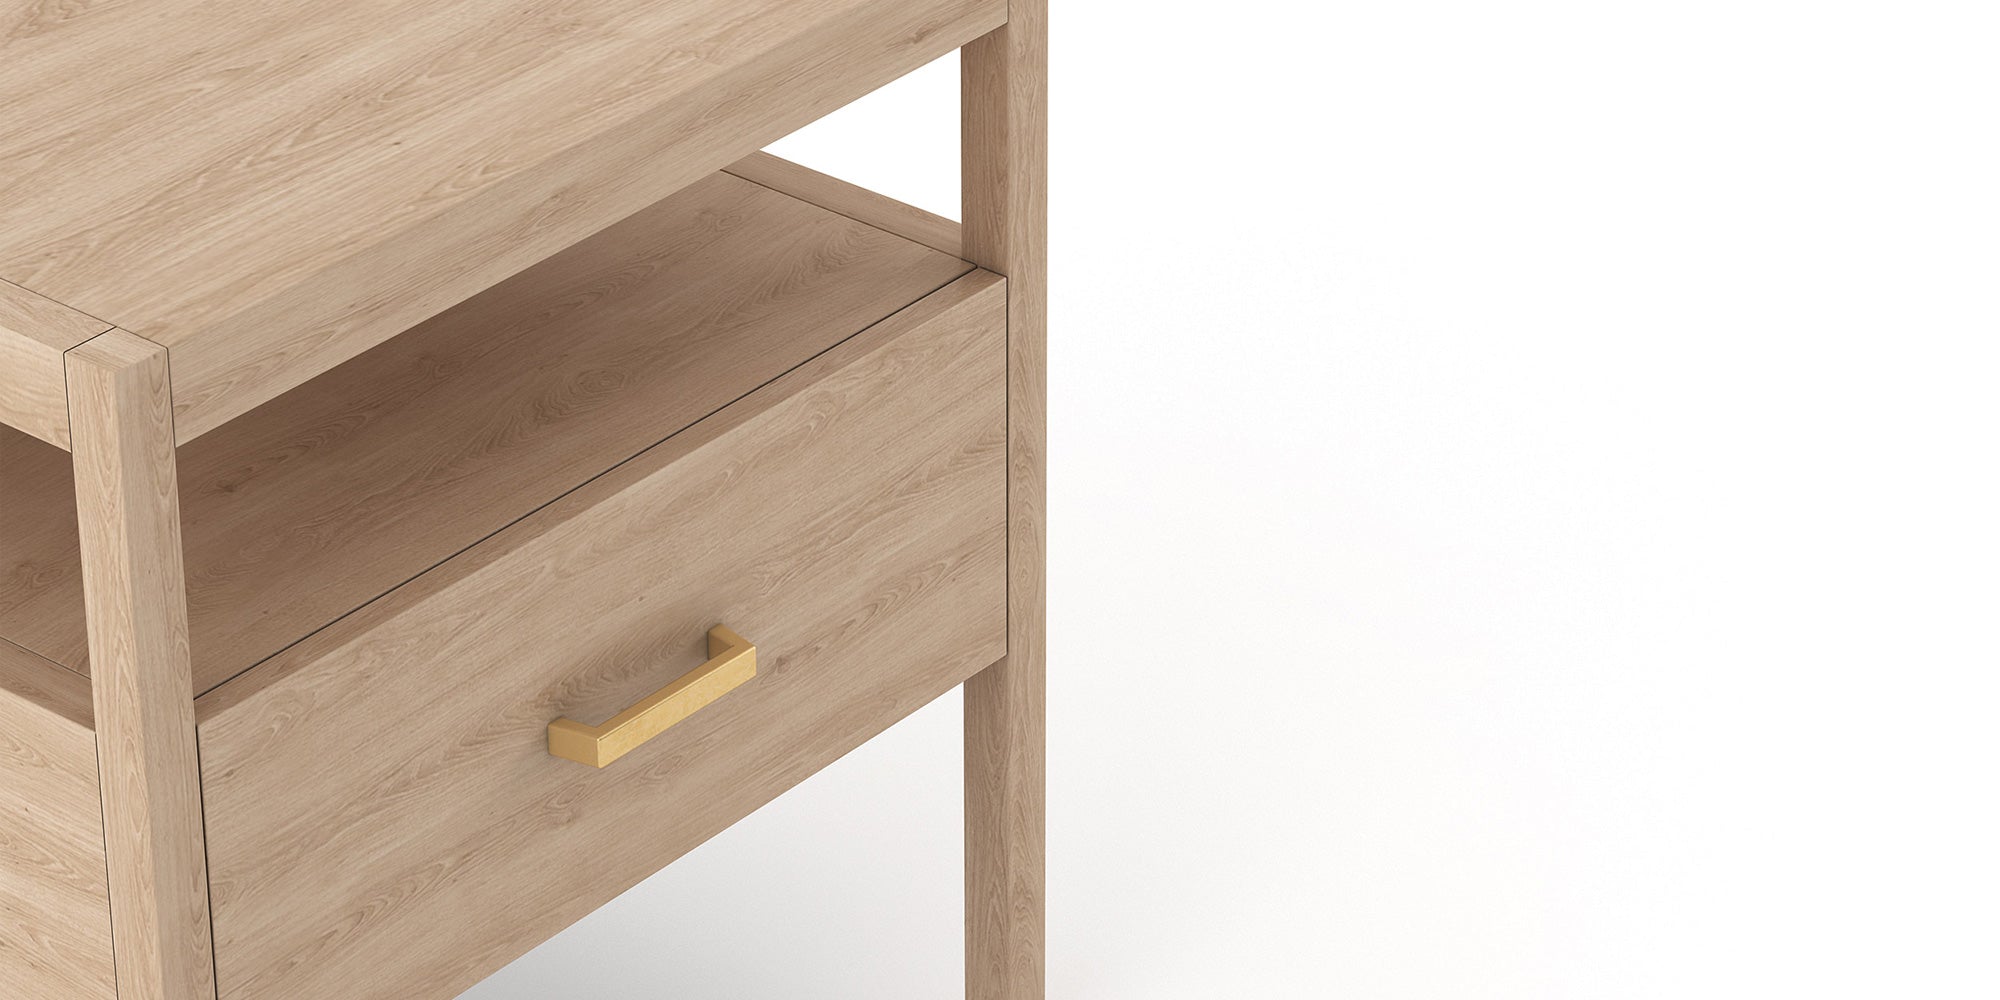 IRL: Shown in solid Maple highlighting the decorative brass pull